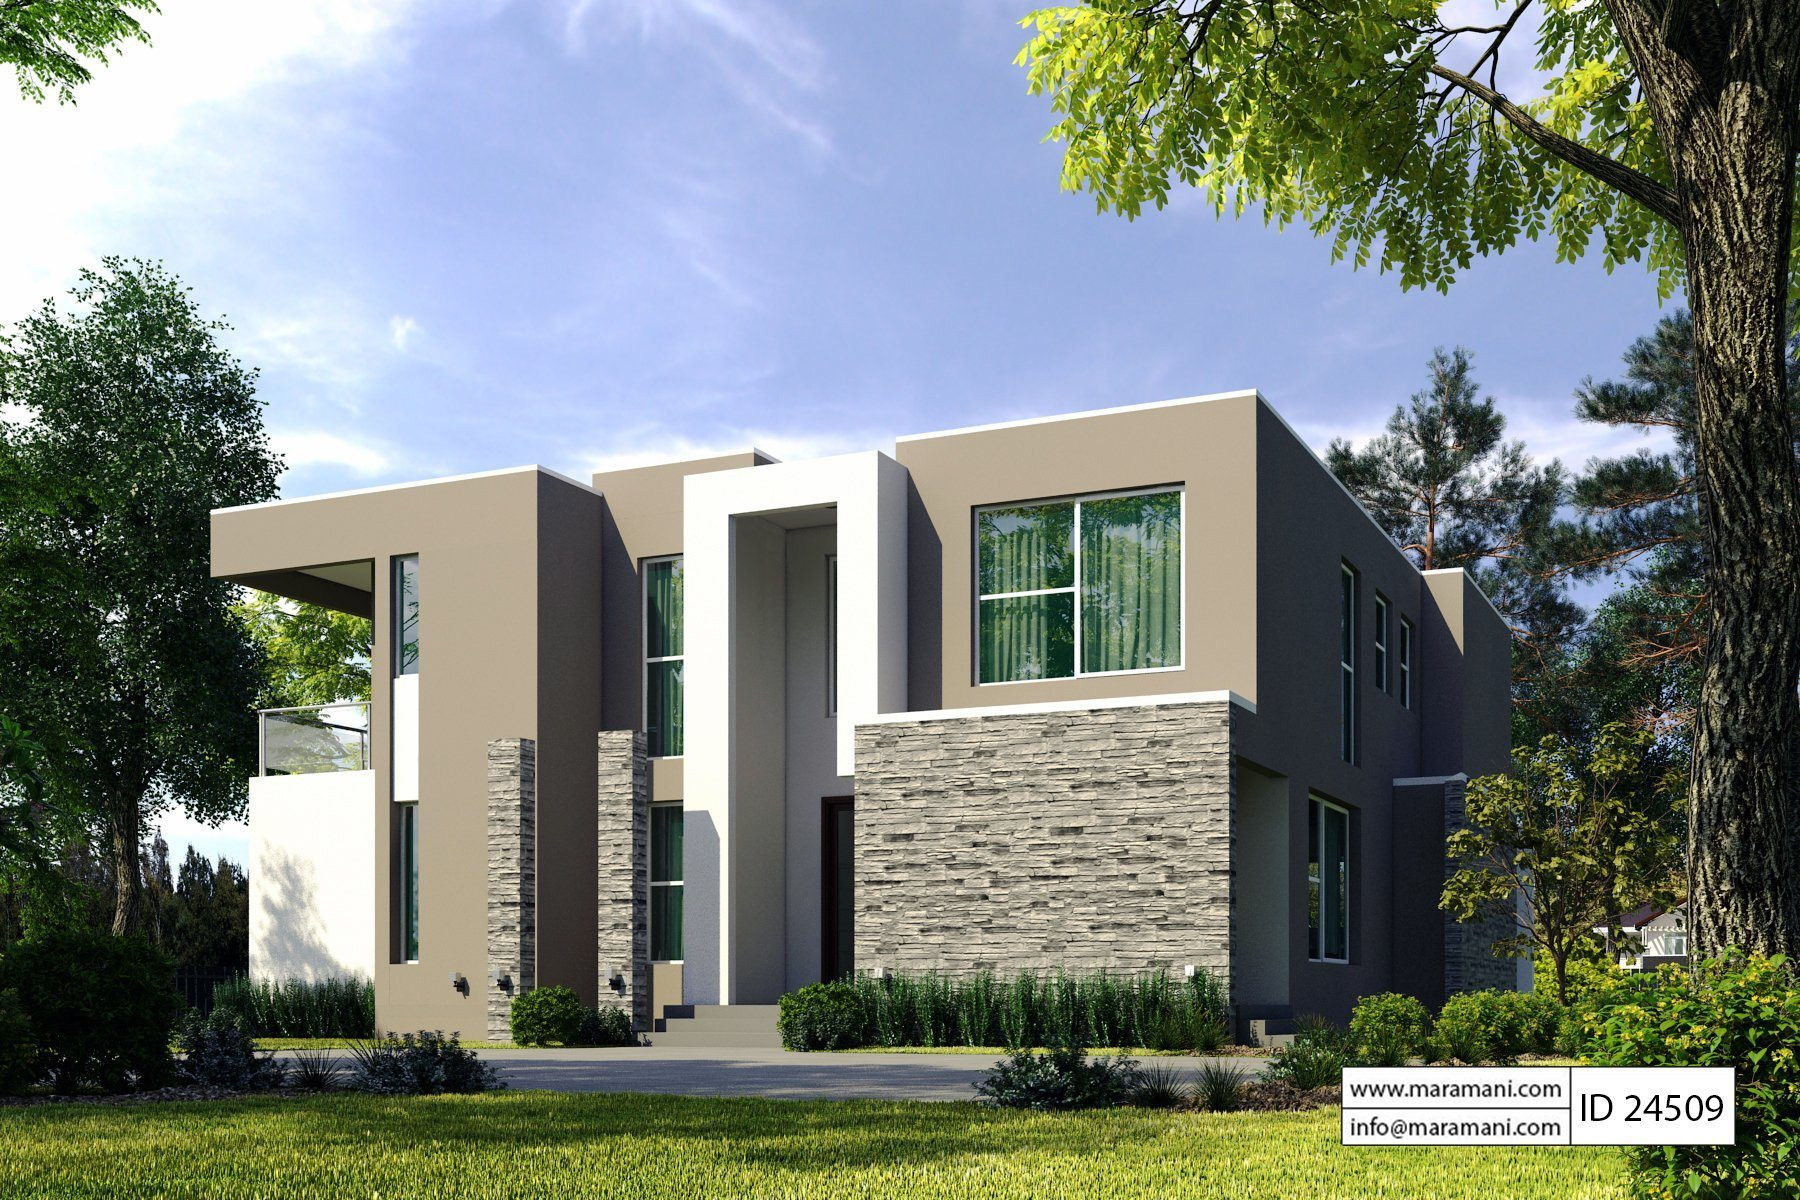 4 Bedroom Modern House Plans
 4 bedroom modern house plan ID House Plans by